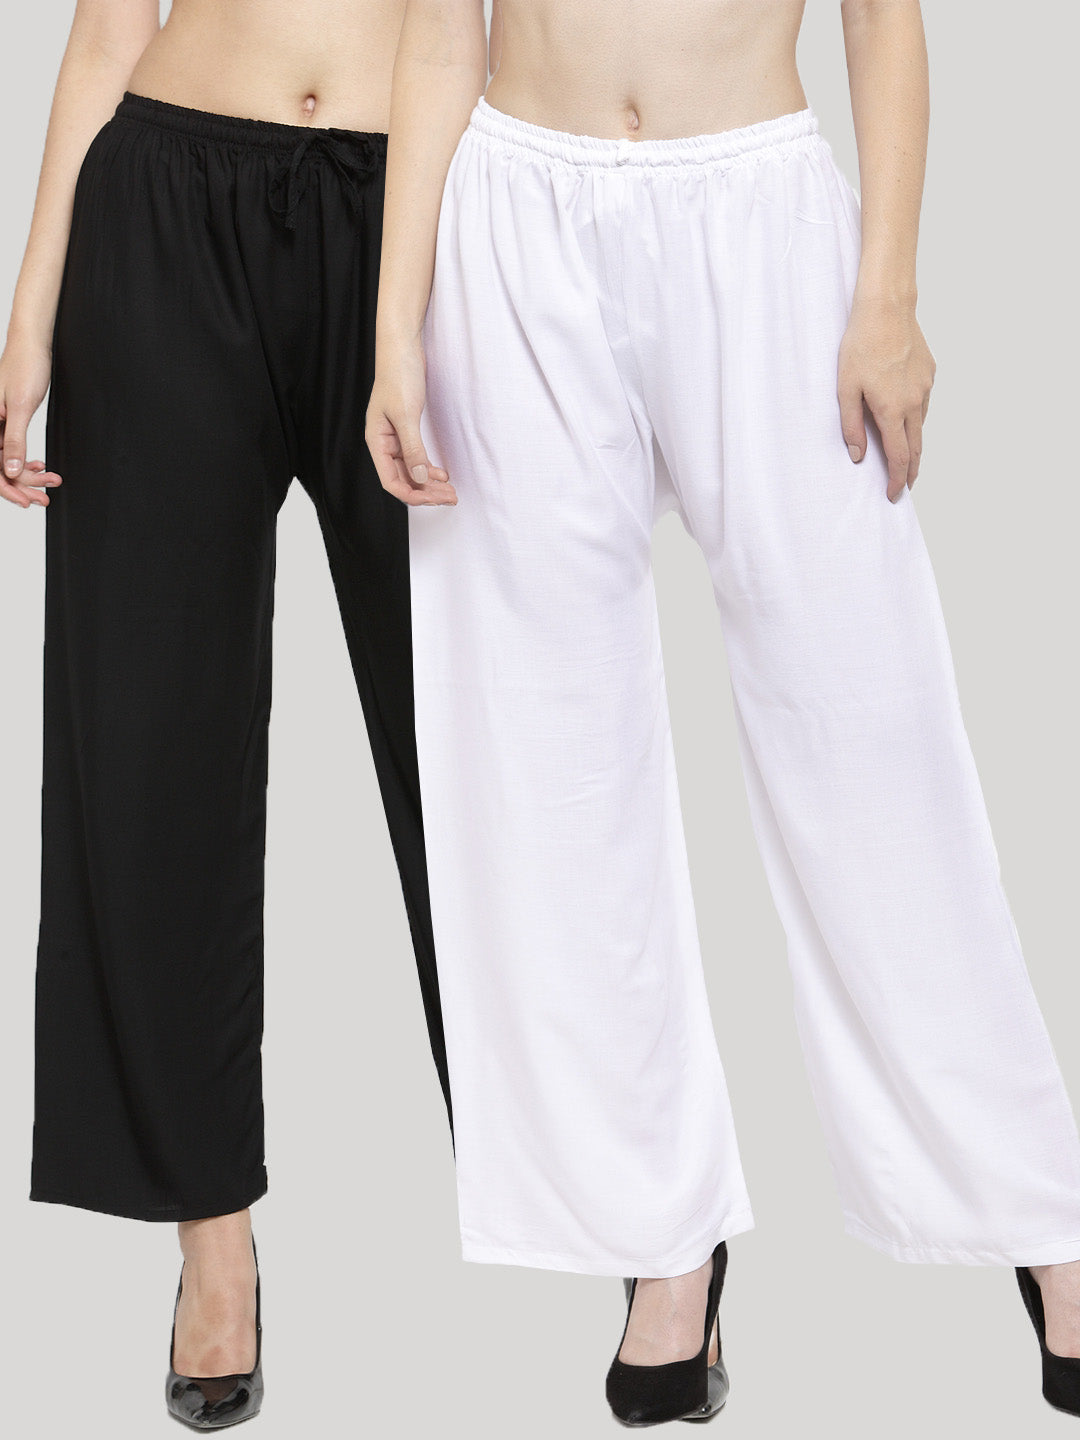 Clora Solid Black & White Rayon Palazzo (Pack Of 2)